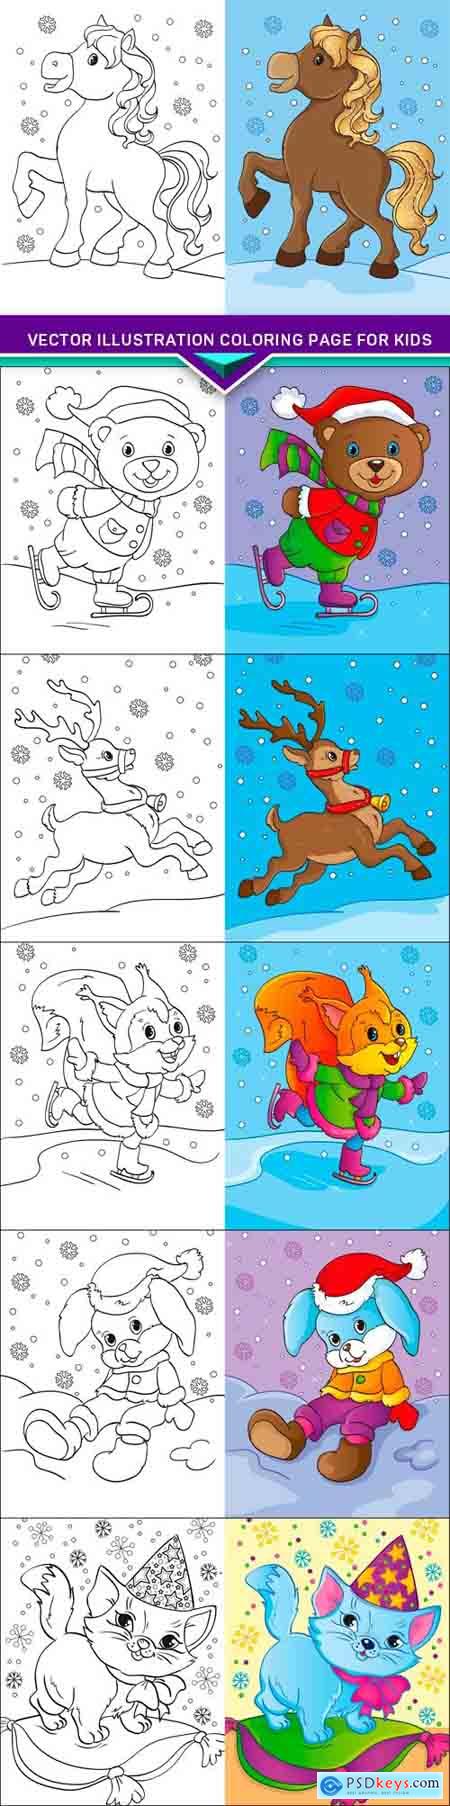 Vector illustration coloring page for kids 6X EPS